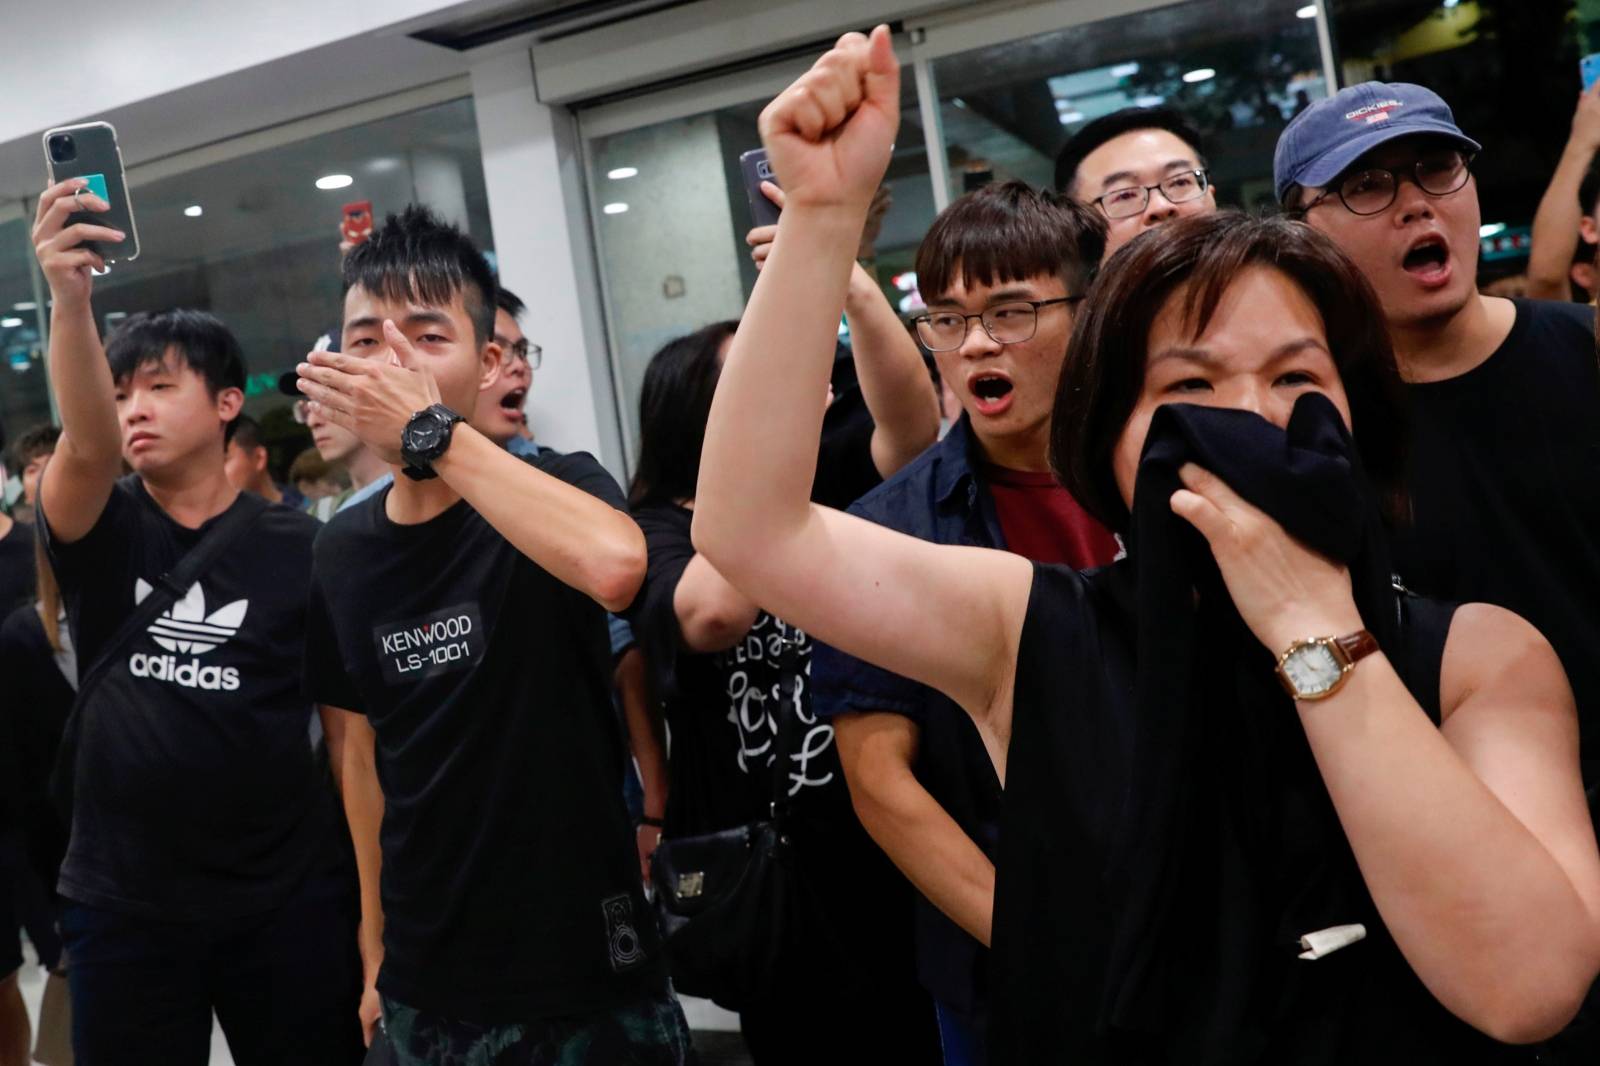 Anti-government protesters shout during a protest at a shopping mall in Tai Po, Hong Kong